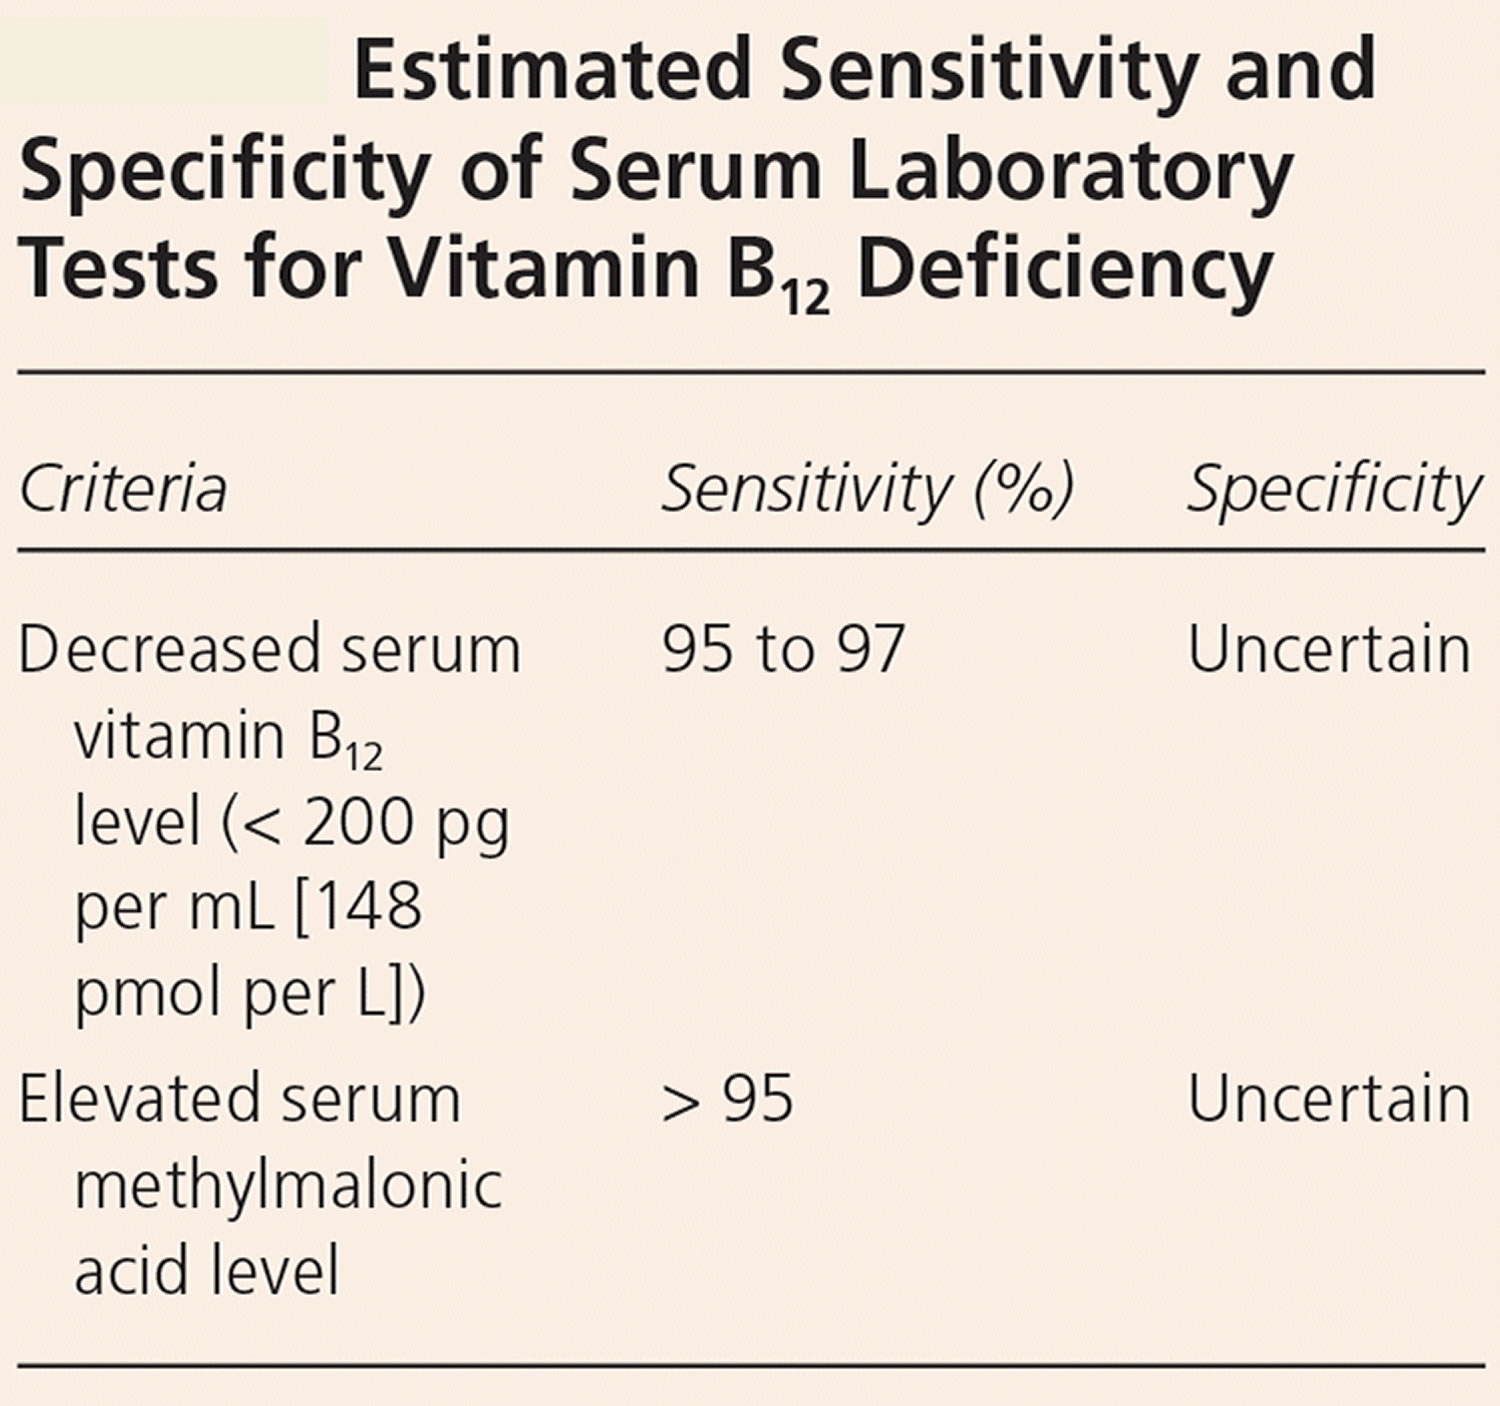 vitamin B12 deficiency laboratory tests sensitivities and specificities